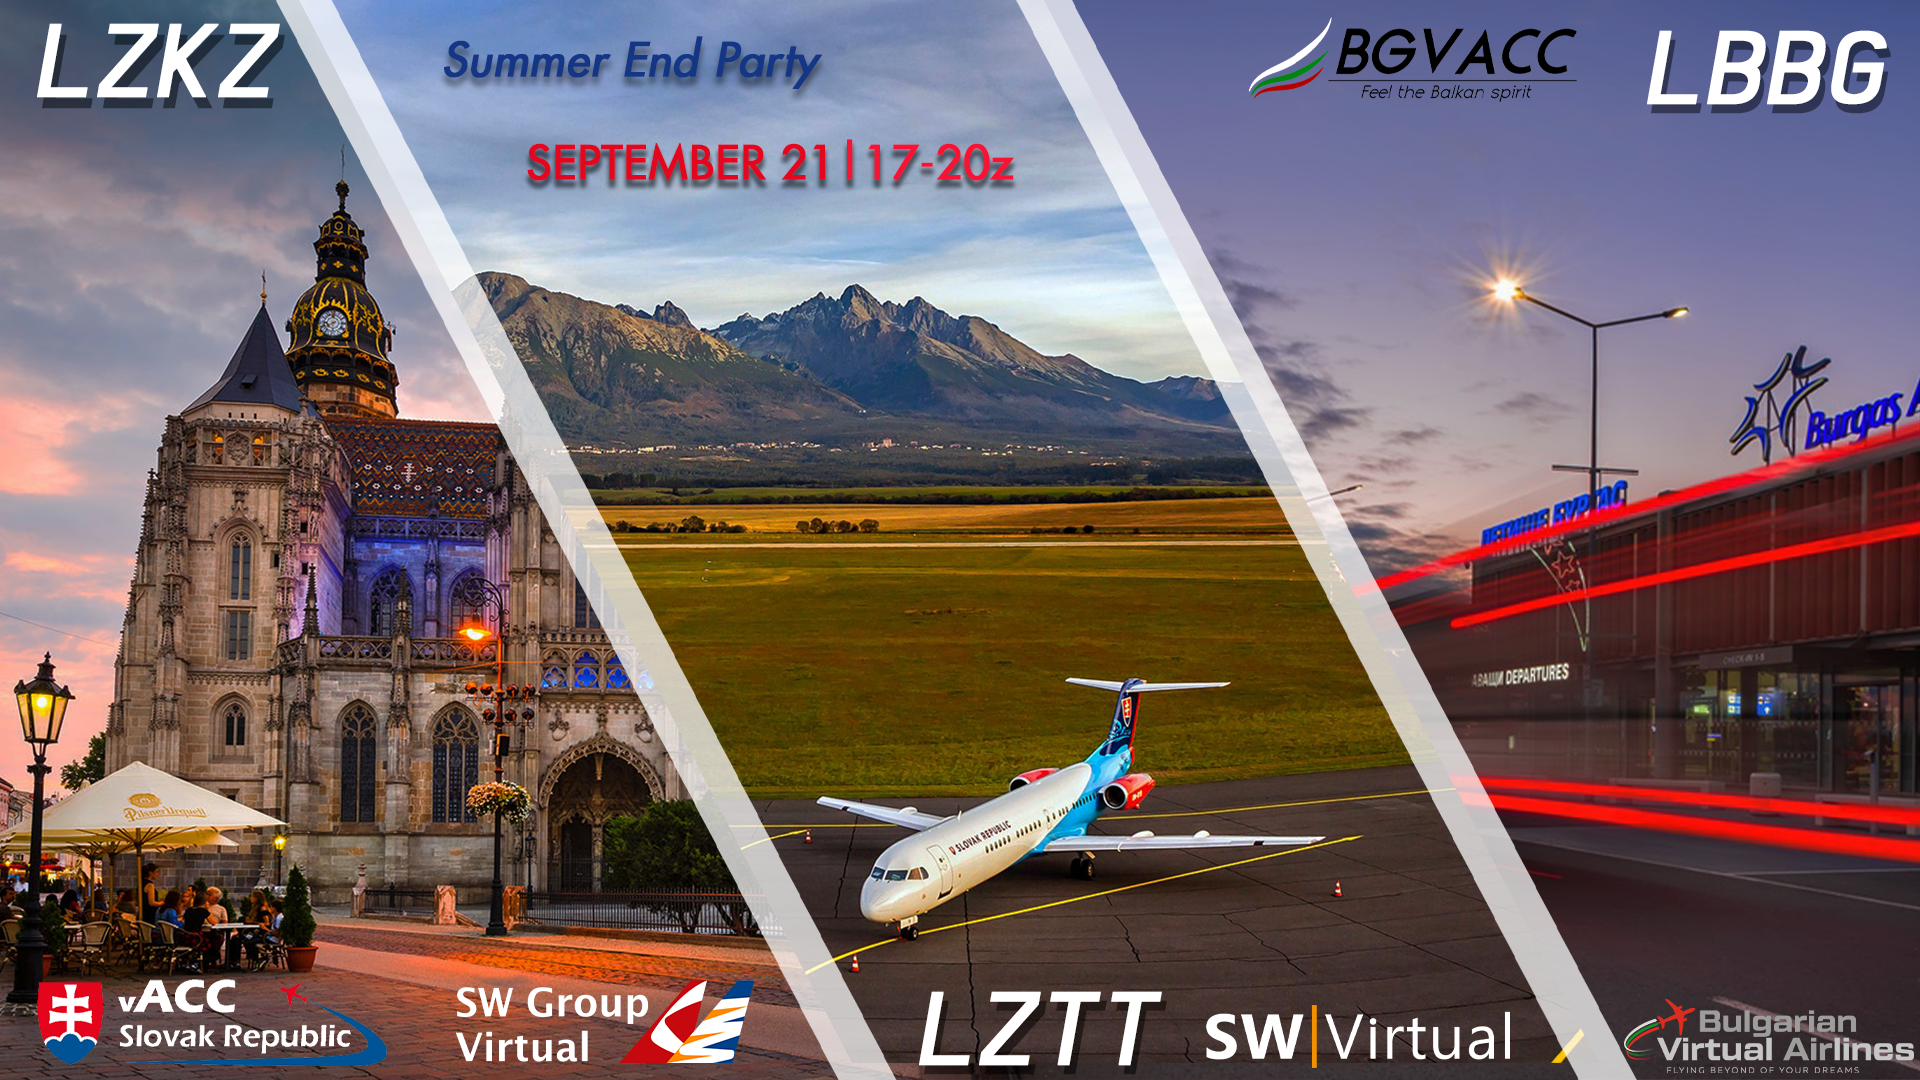 Summer End Party - Virtual Norwegian Events